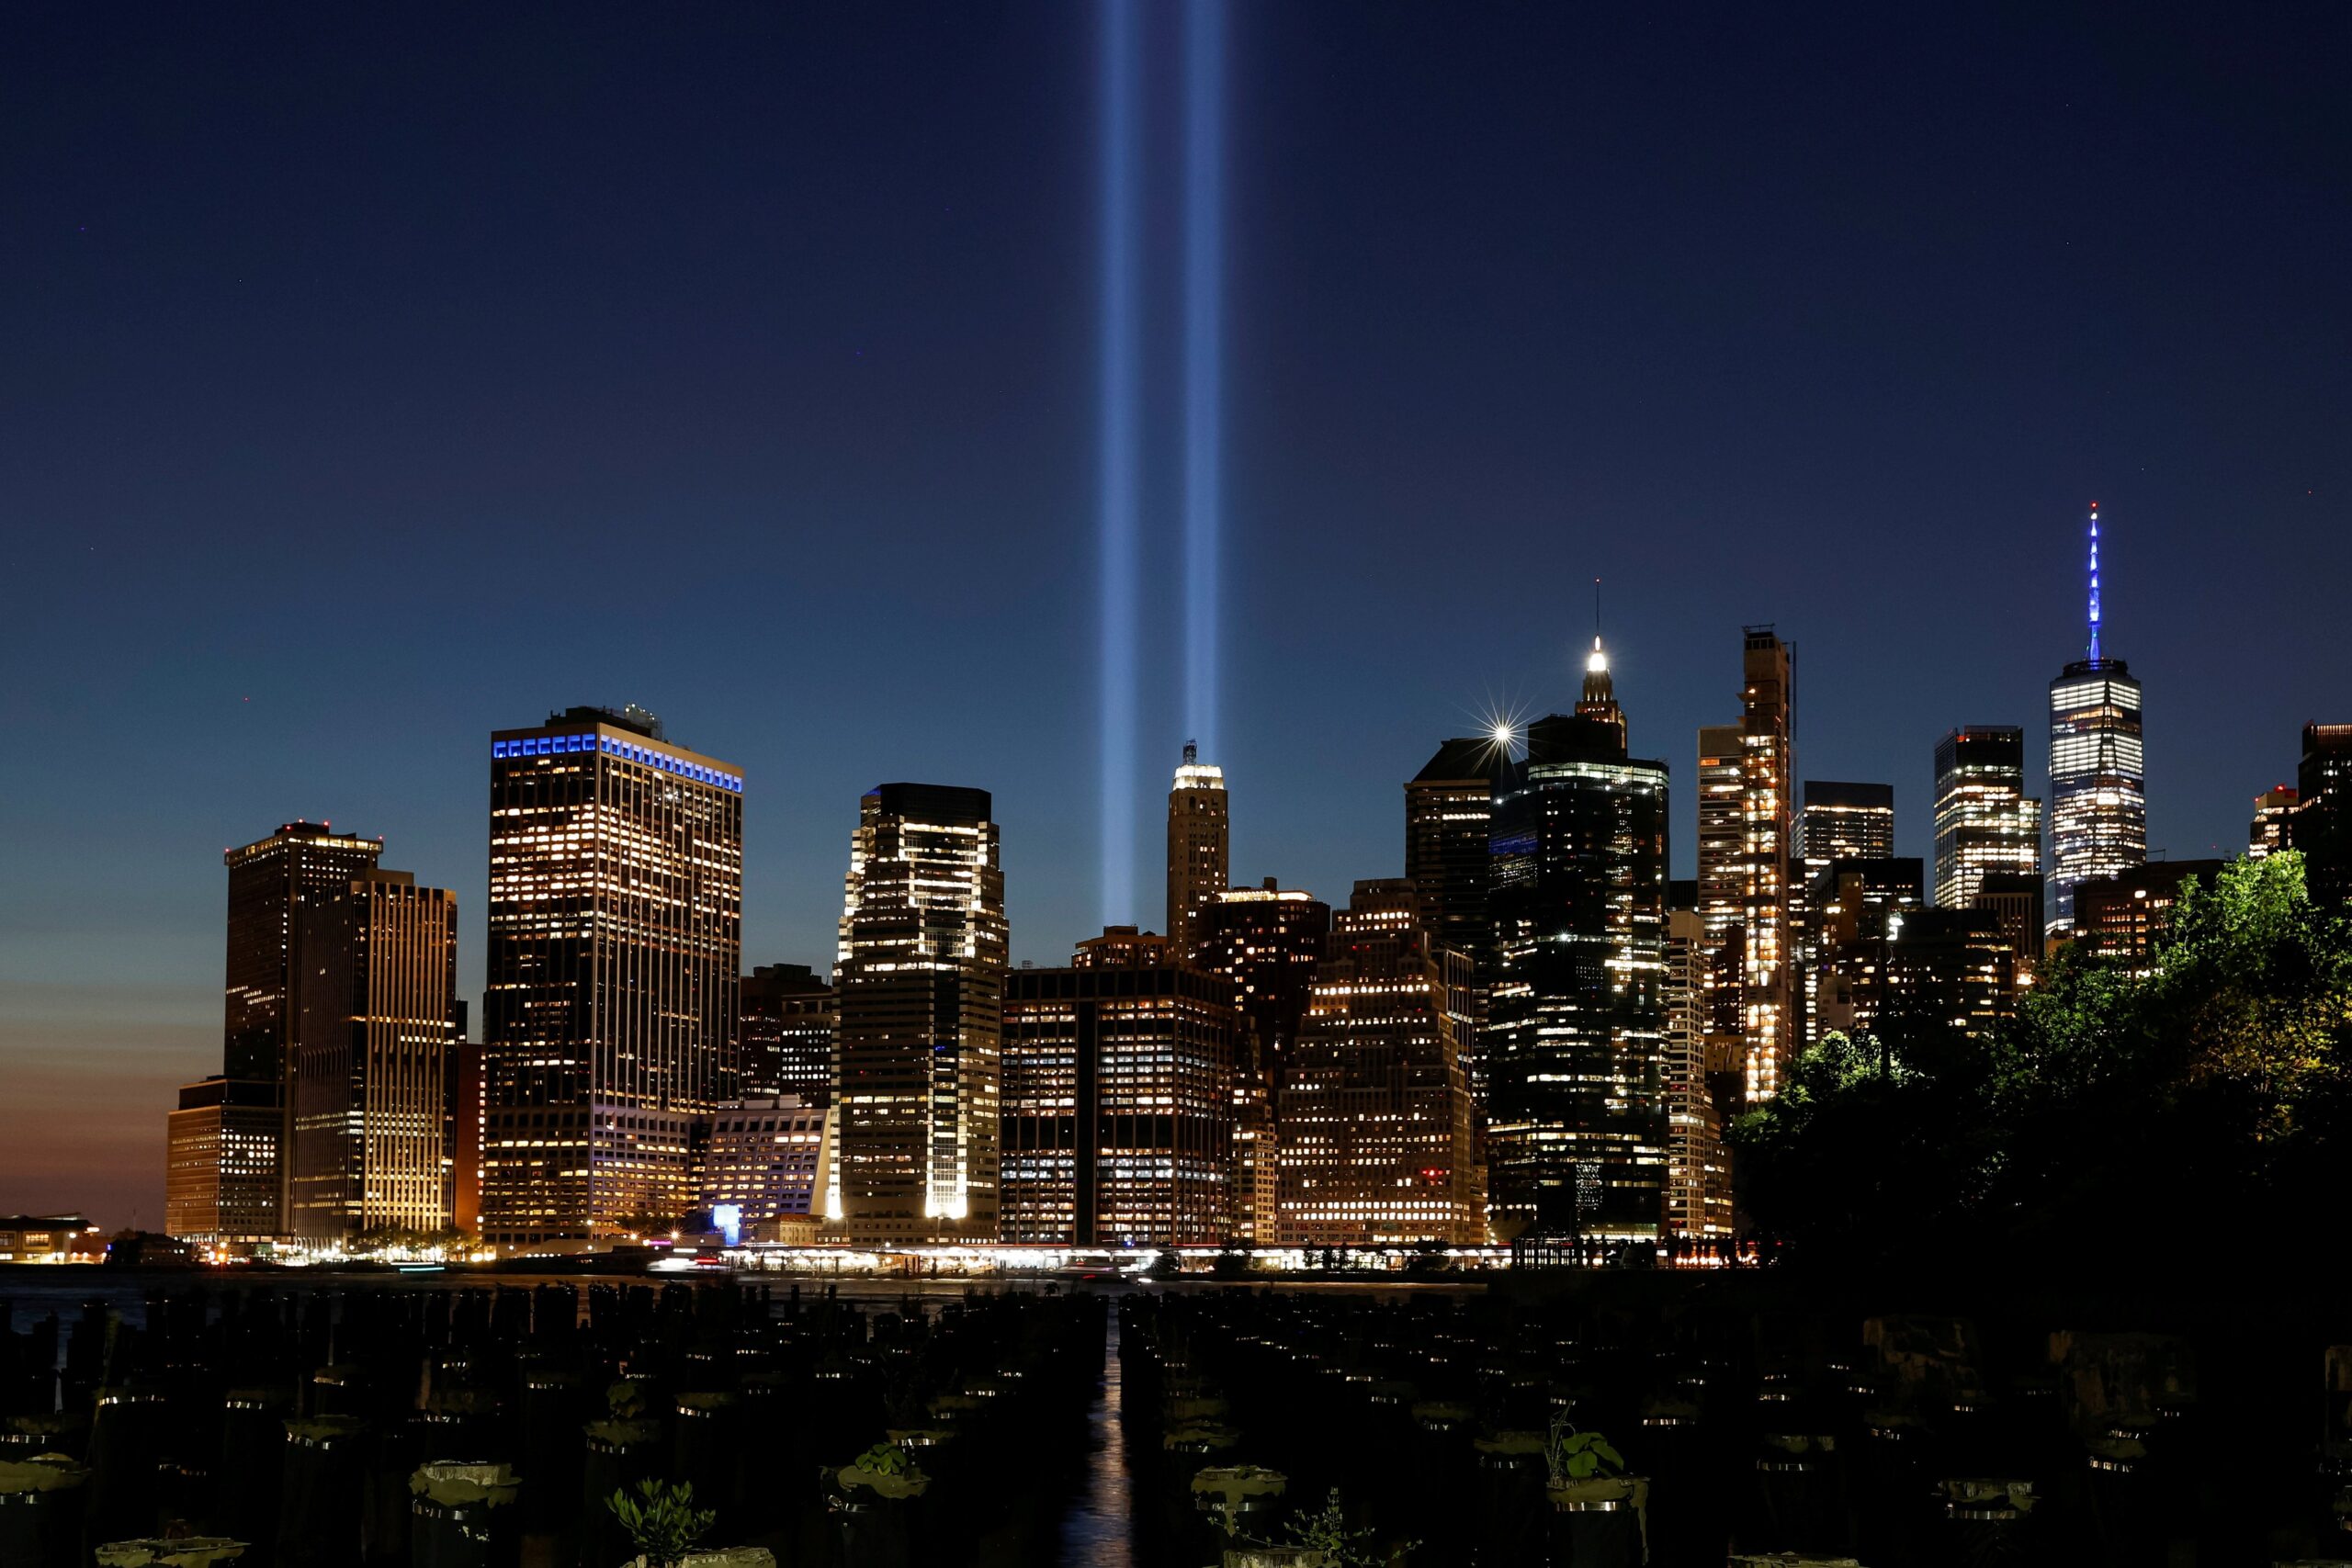 The Tribute in Light installation and the One World Trade Center tower are seen from Brooklyn Bridge Park in New York City Sept. 11, 2021, the 20th anniversary of the September 11 attacks. (OSV News photo/Brendan McDermid, Reuters)